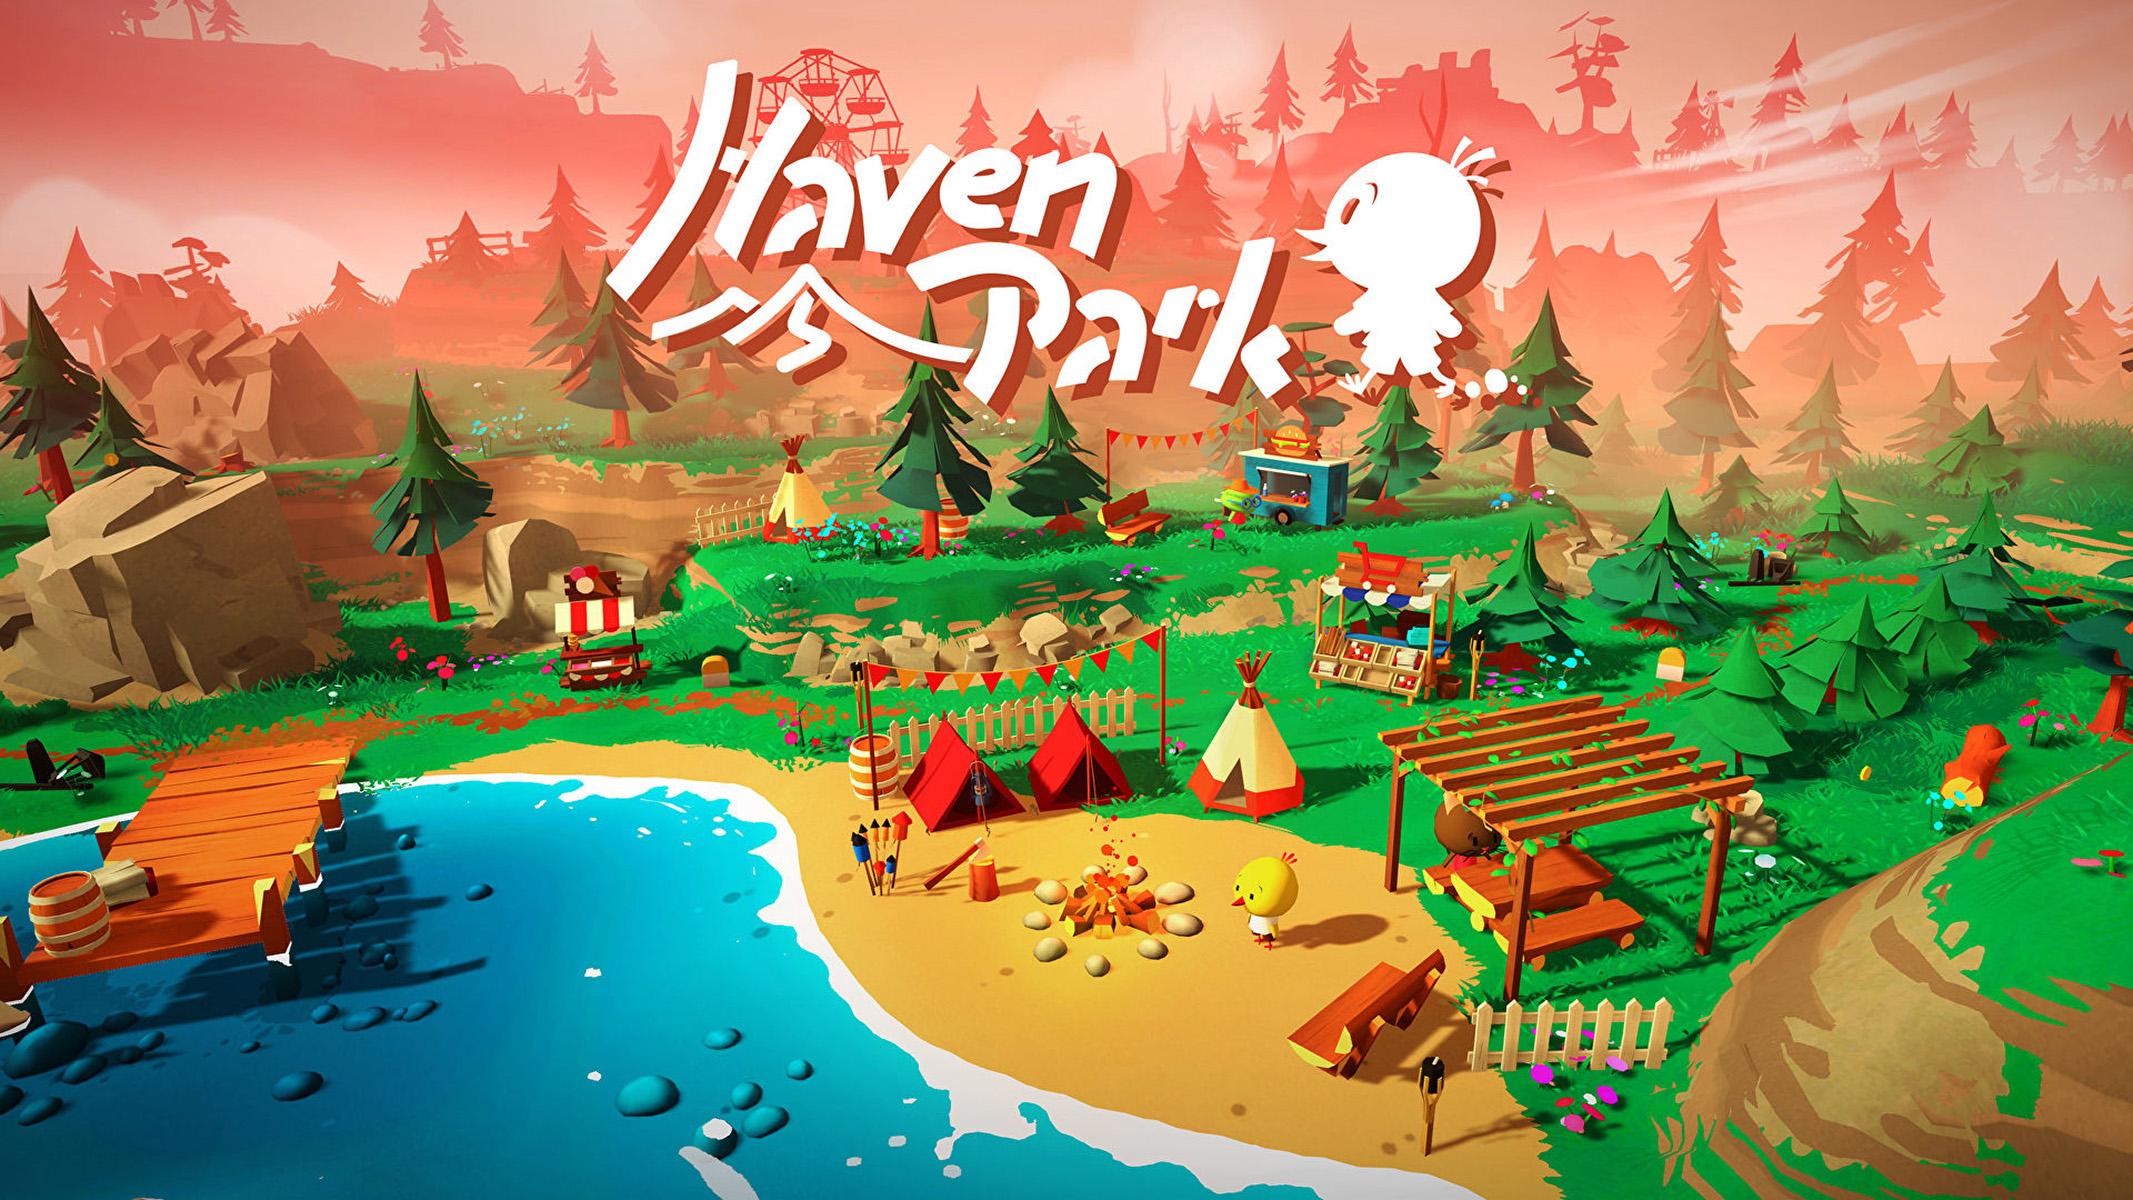 Haven Park game review: Explore the world with Flint